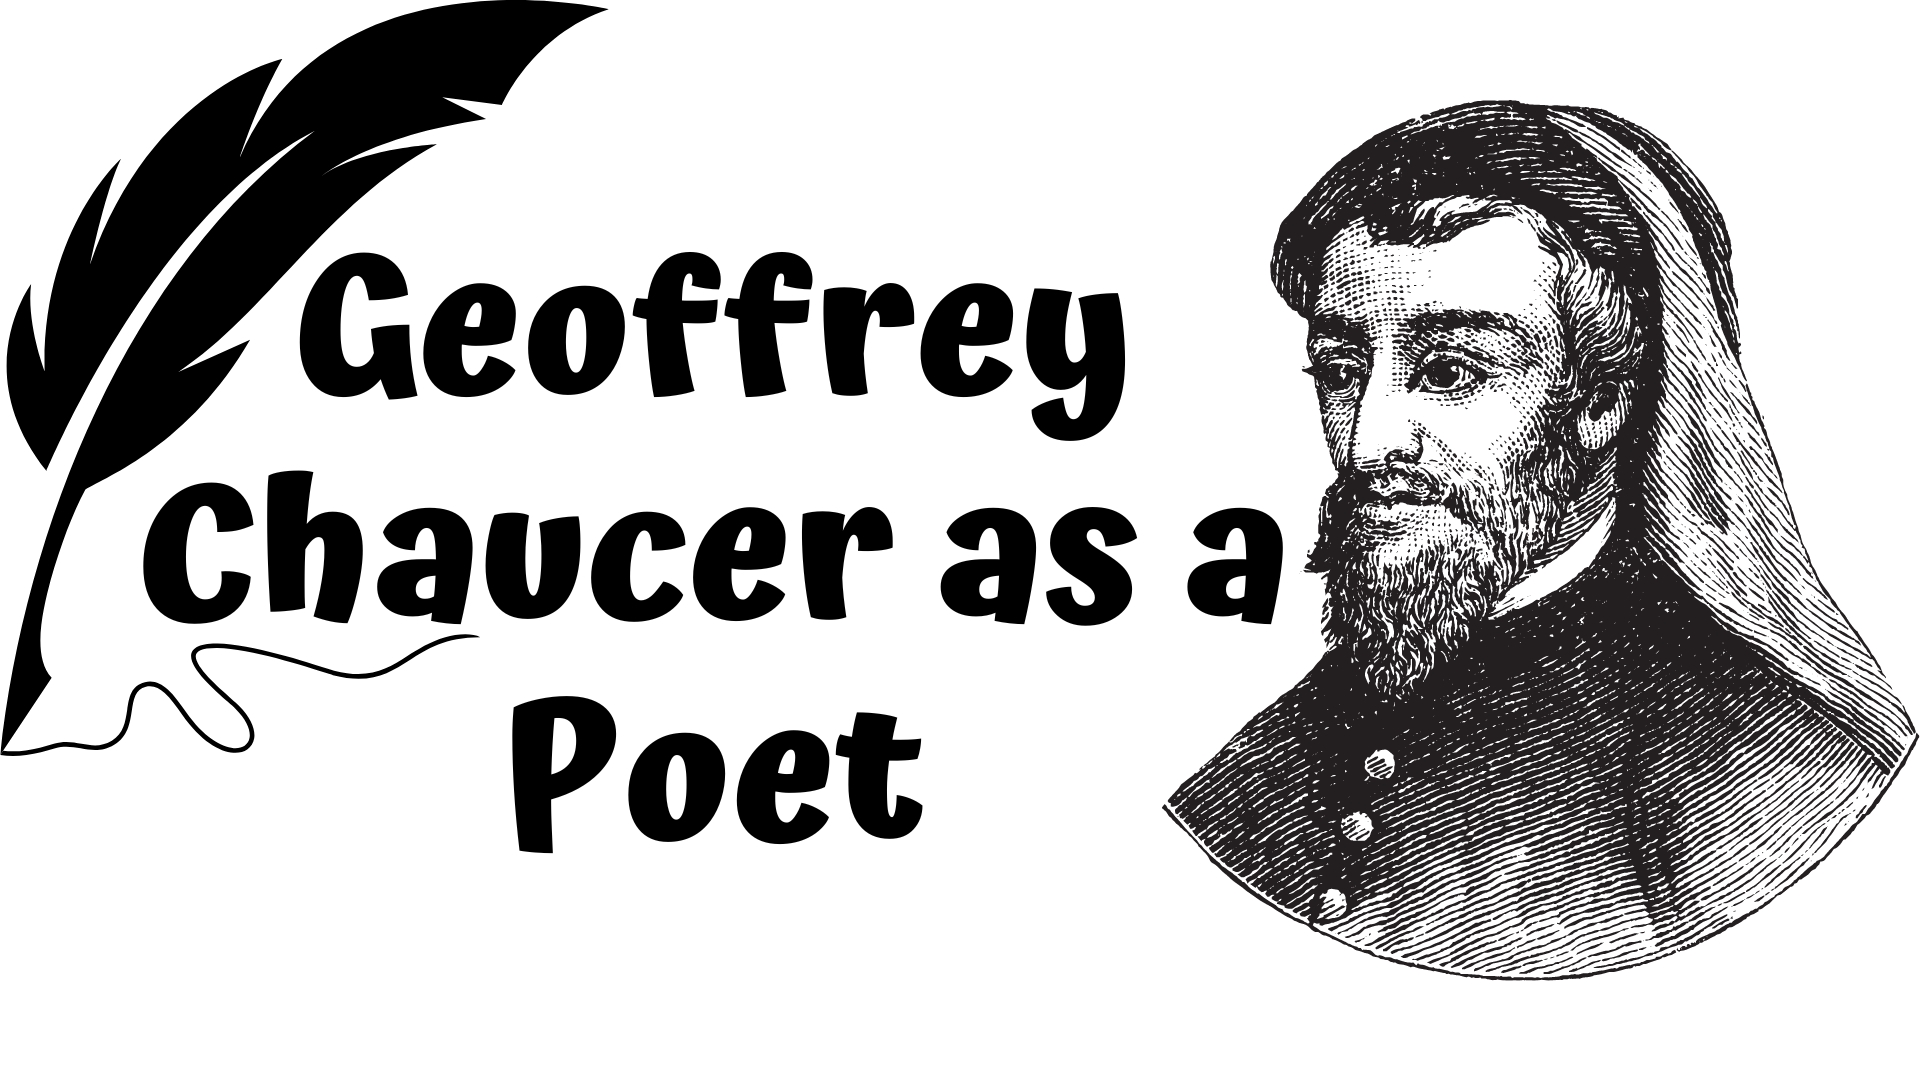 Geoffrey Chaucer as a Poet